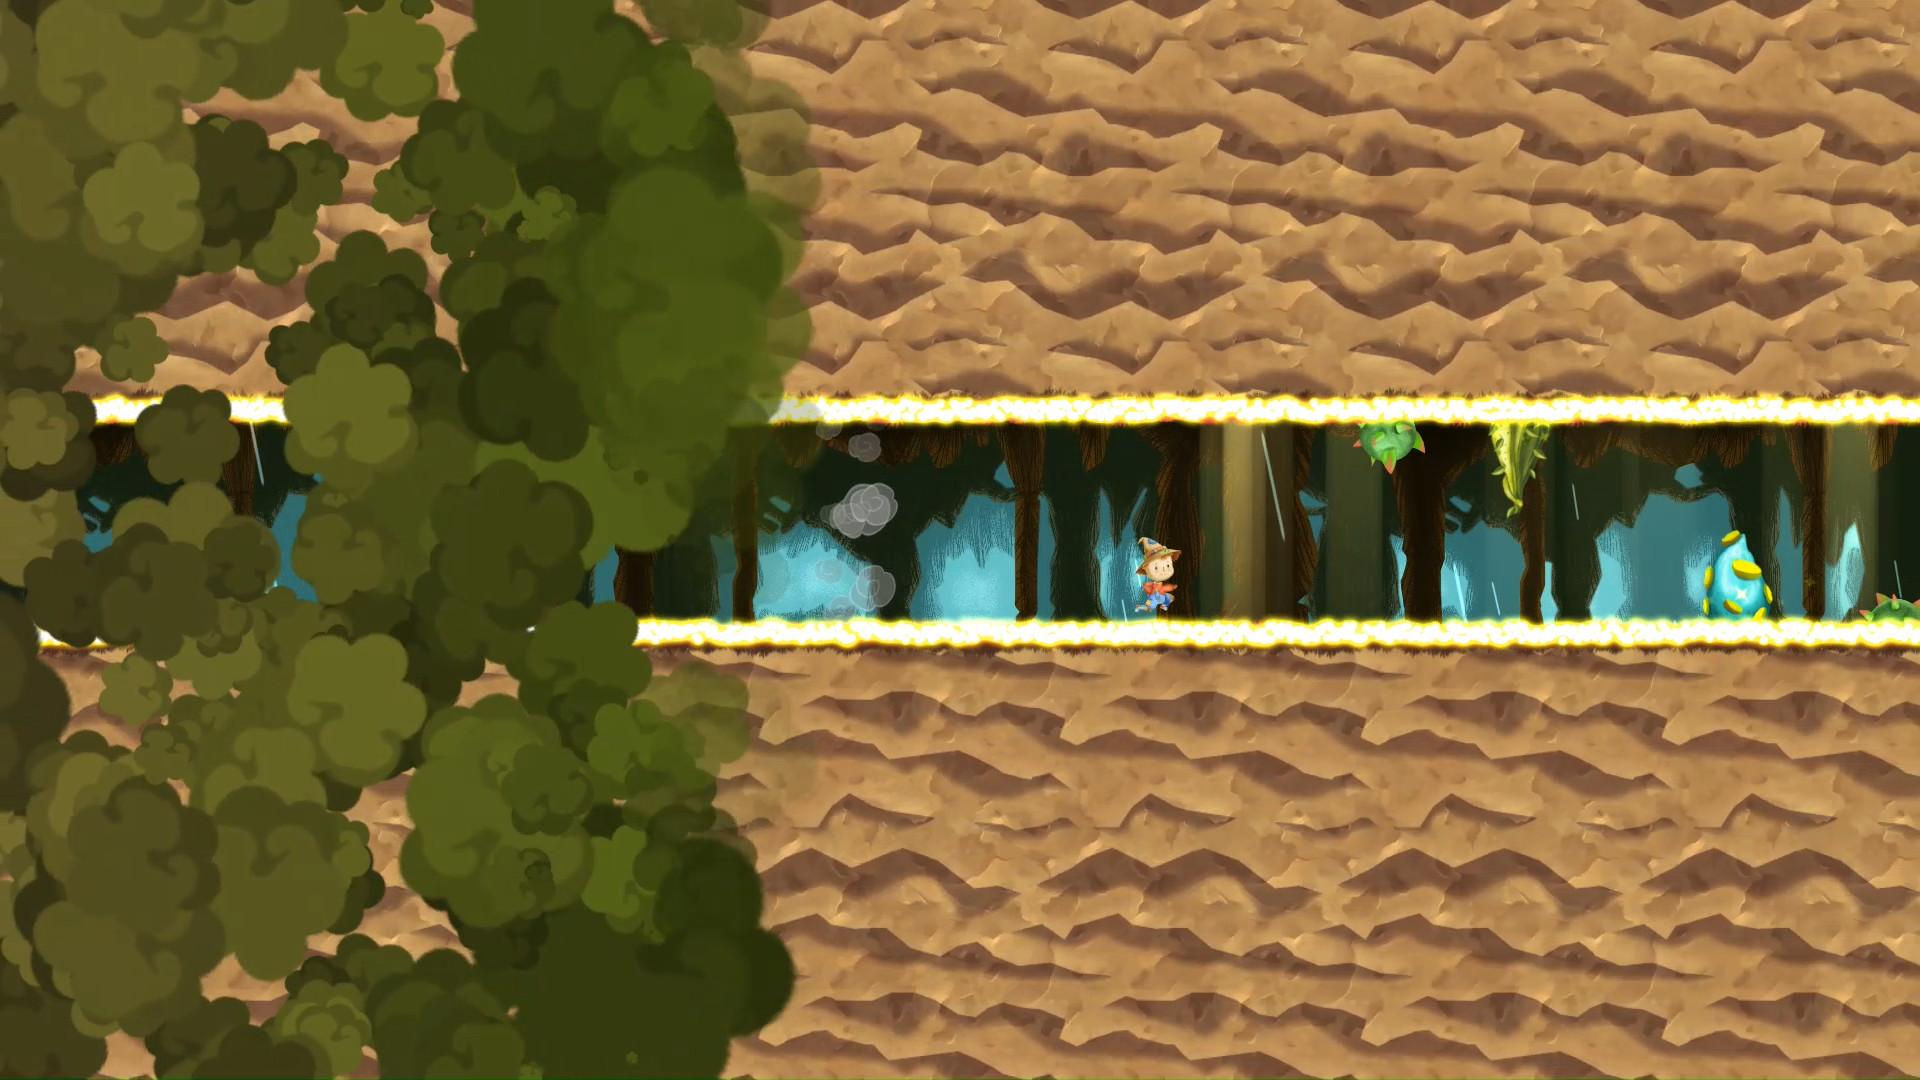 Screenshot №9 from game Upside Down